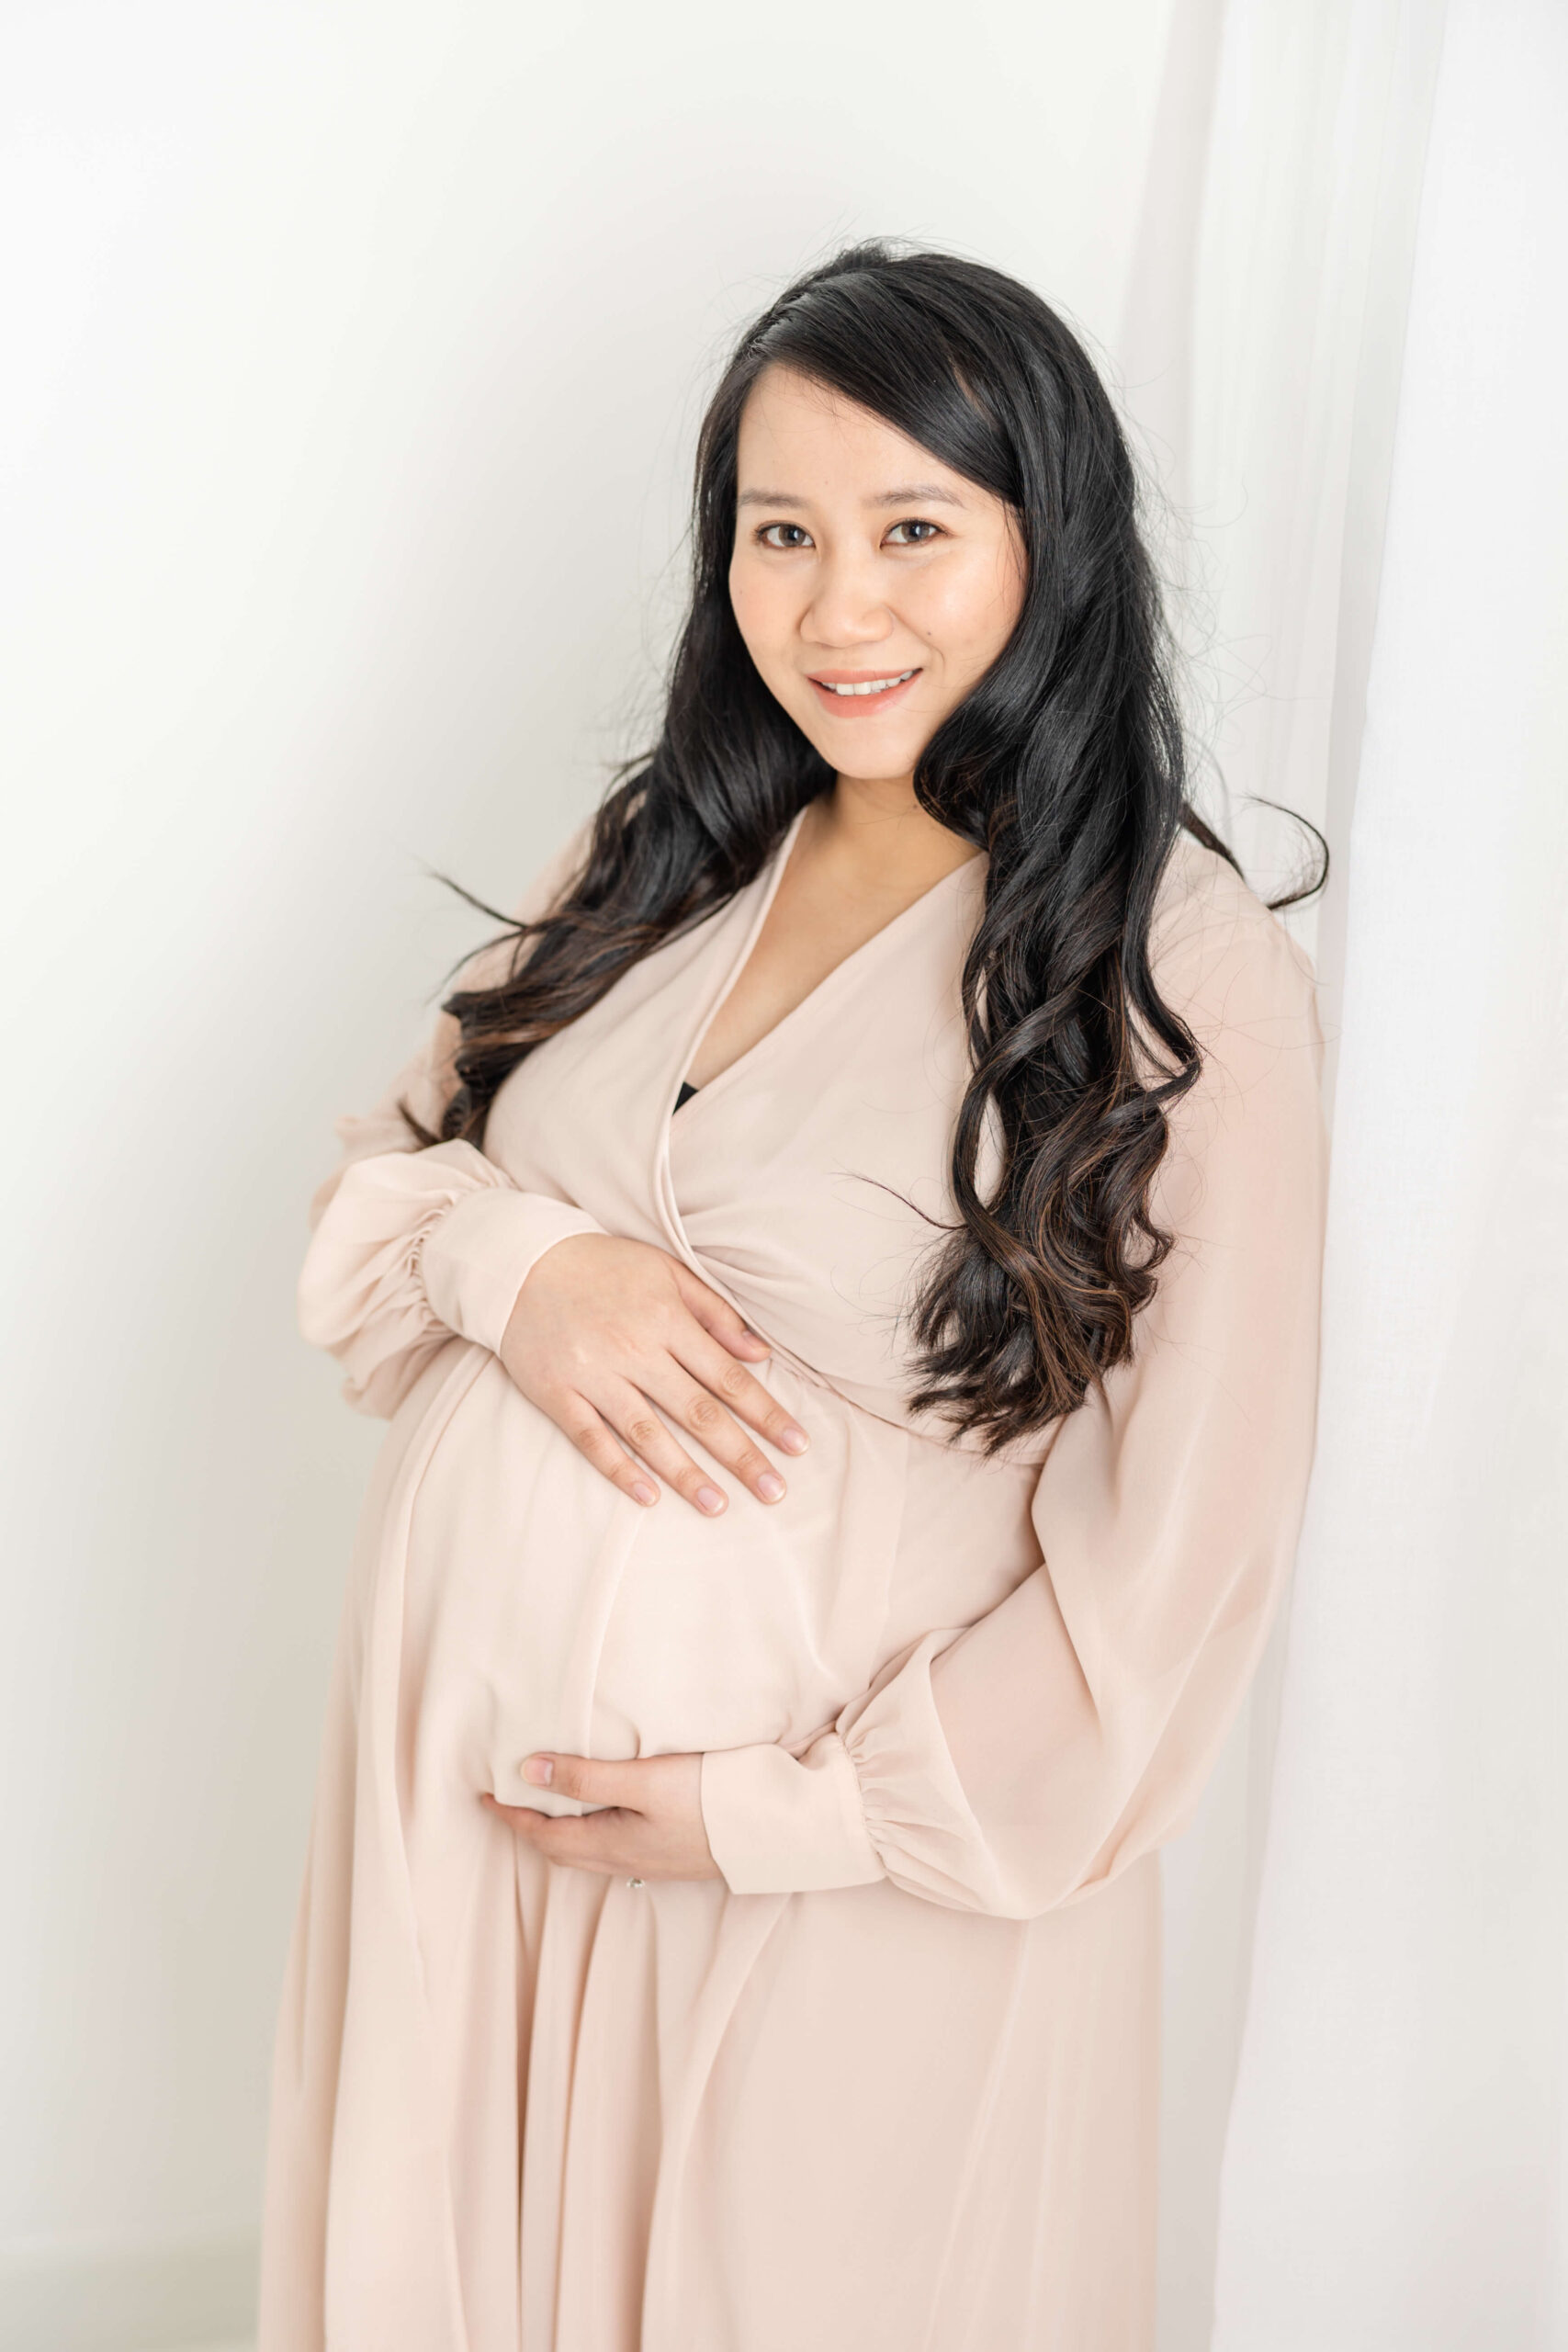 Soon to be mom in light pink, long sleeve dress shows her baby bump.